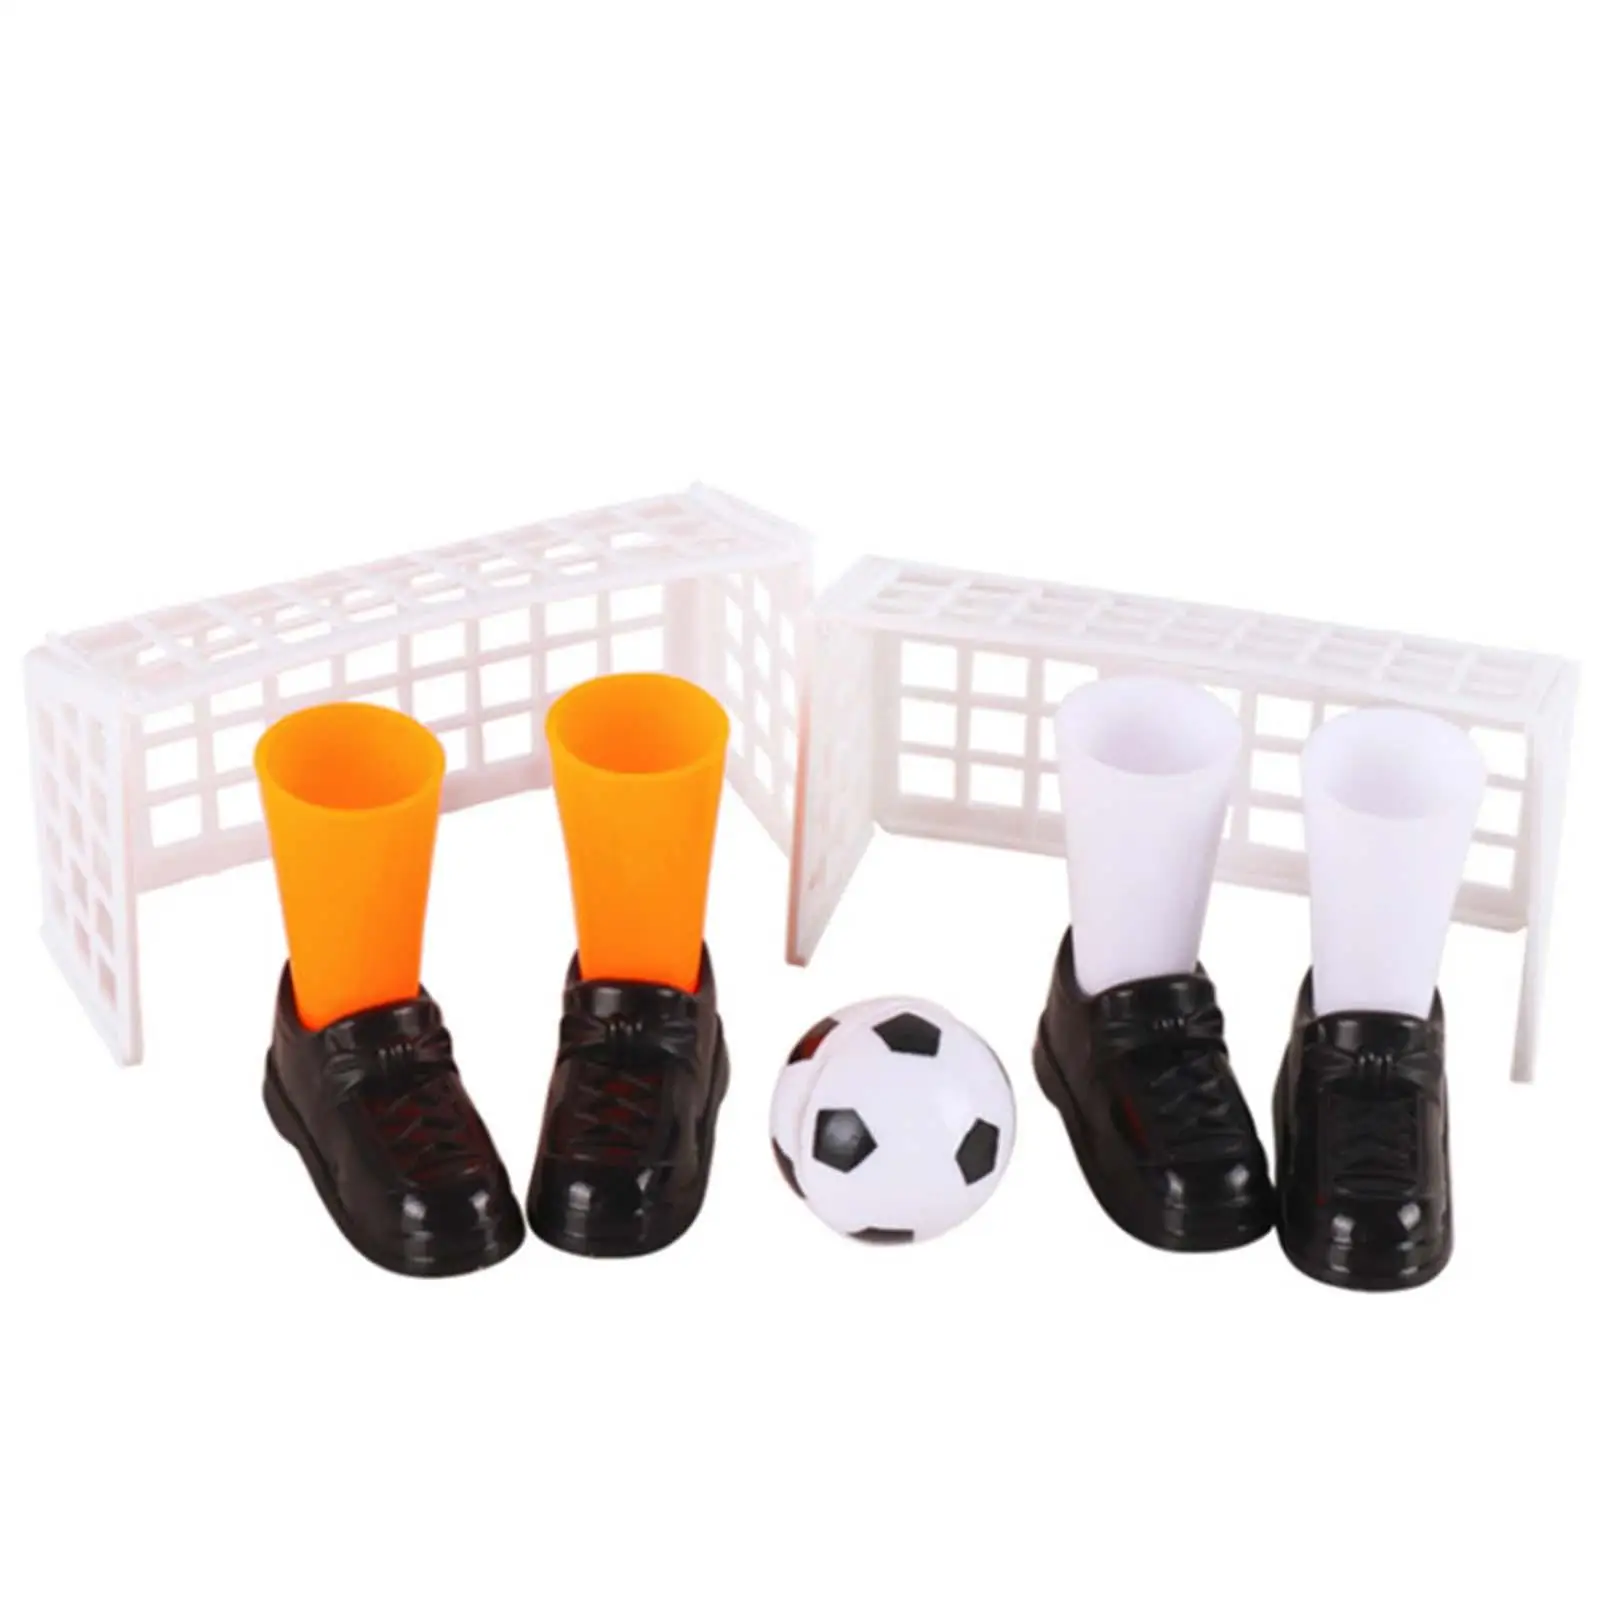 Table Finger Football Game Interactive Toy Indoor Funny Football Game for Tabletop